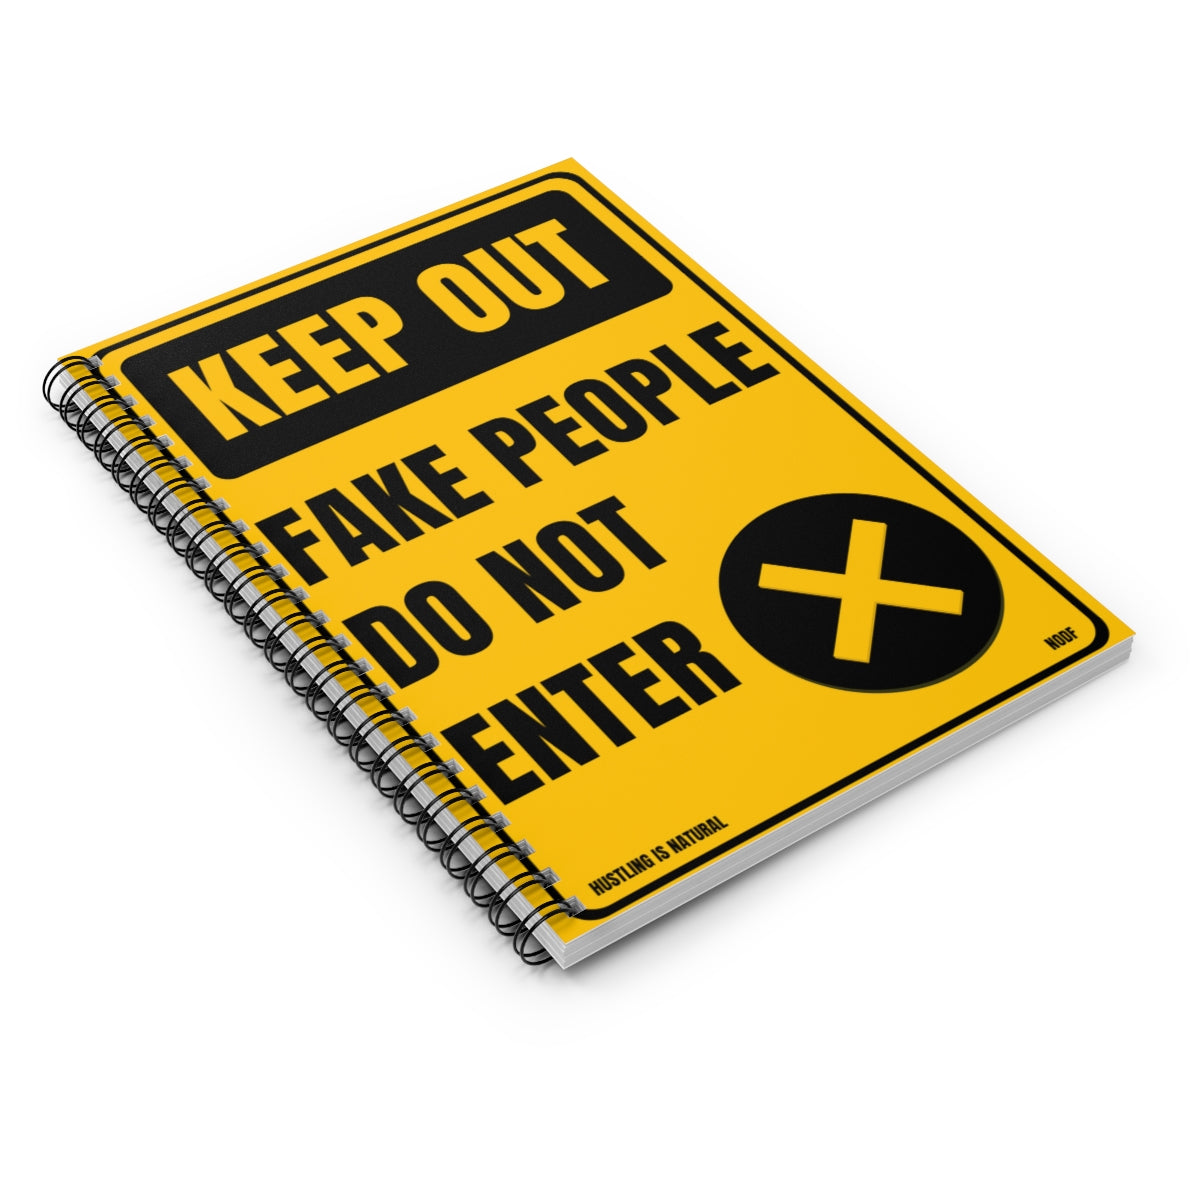 Keep Out- Fake People Do Not Enter (yellow) Spiral Notebook